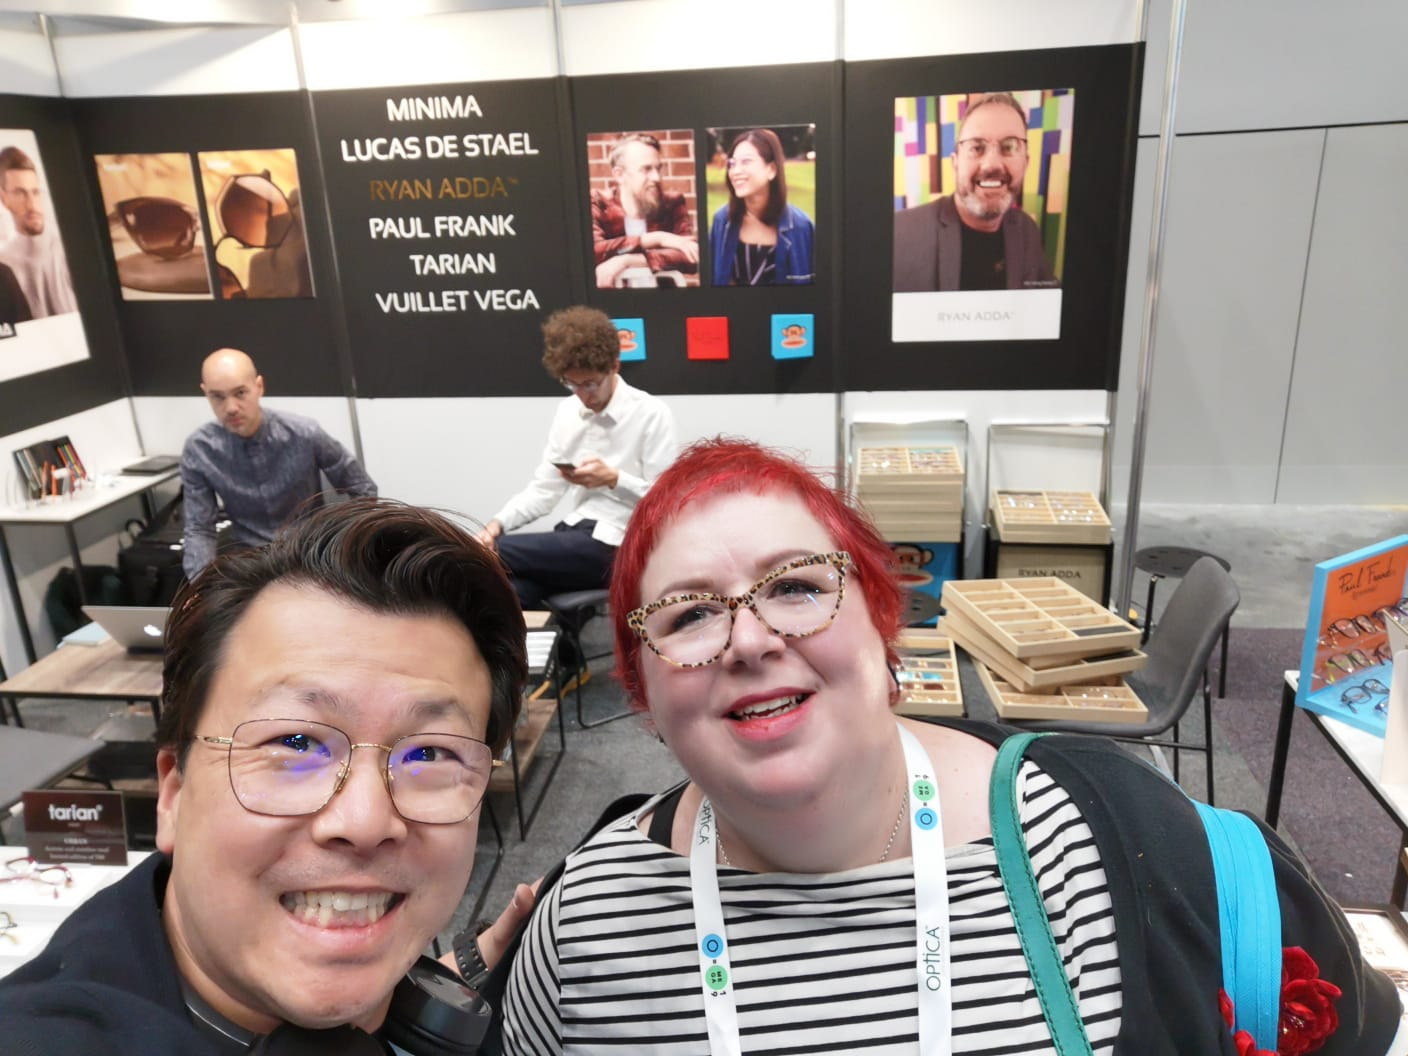 Two individuals are smiling for a selfie at a booth with promotional materials and people in the background at an event or conference.